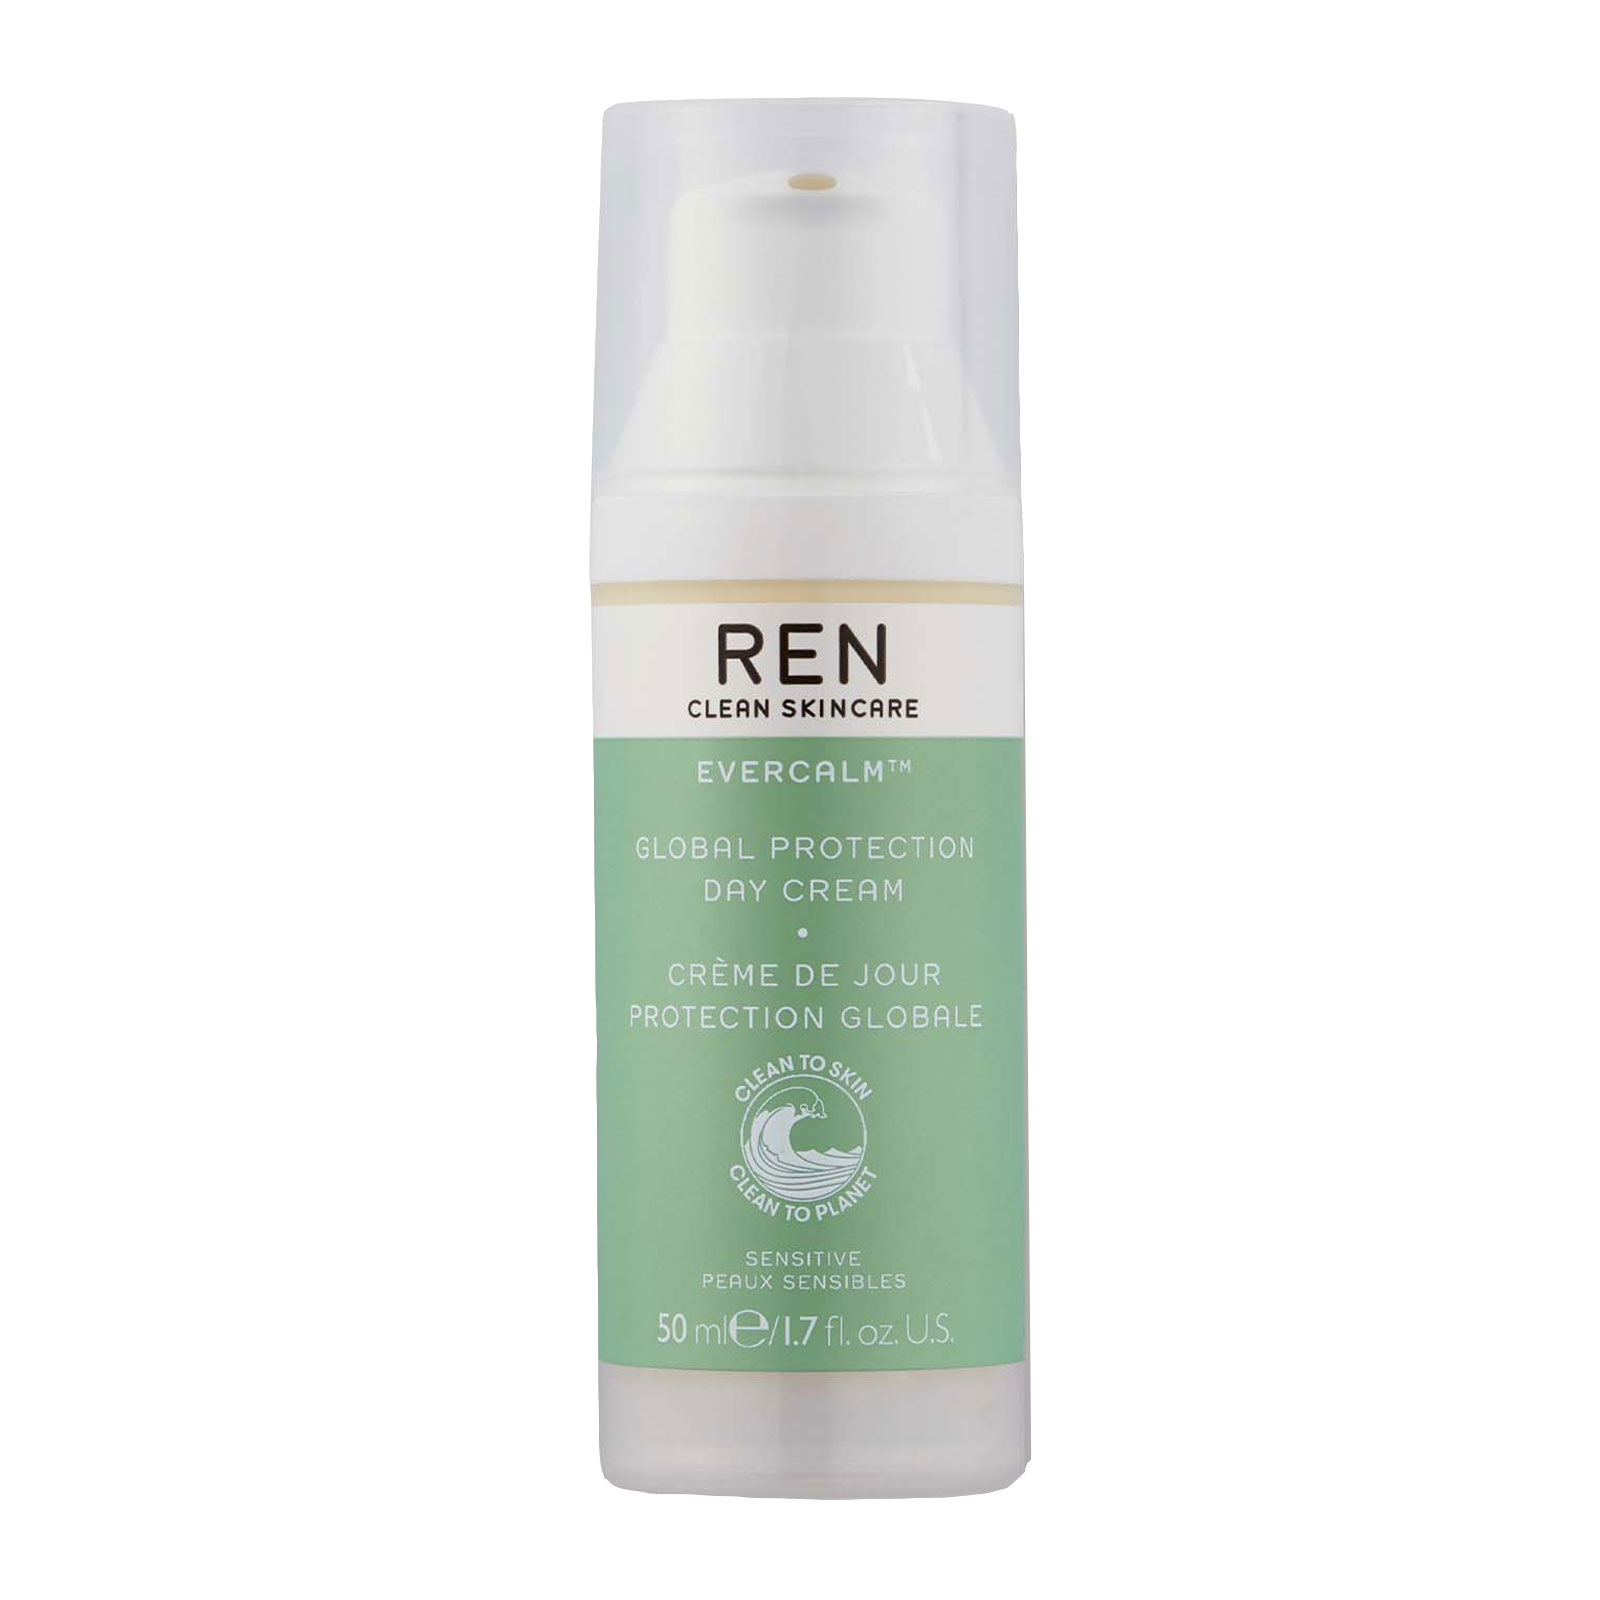 Ren Clean Skincare Evercalm� Global Protection Day Cream 50ml